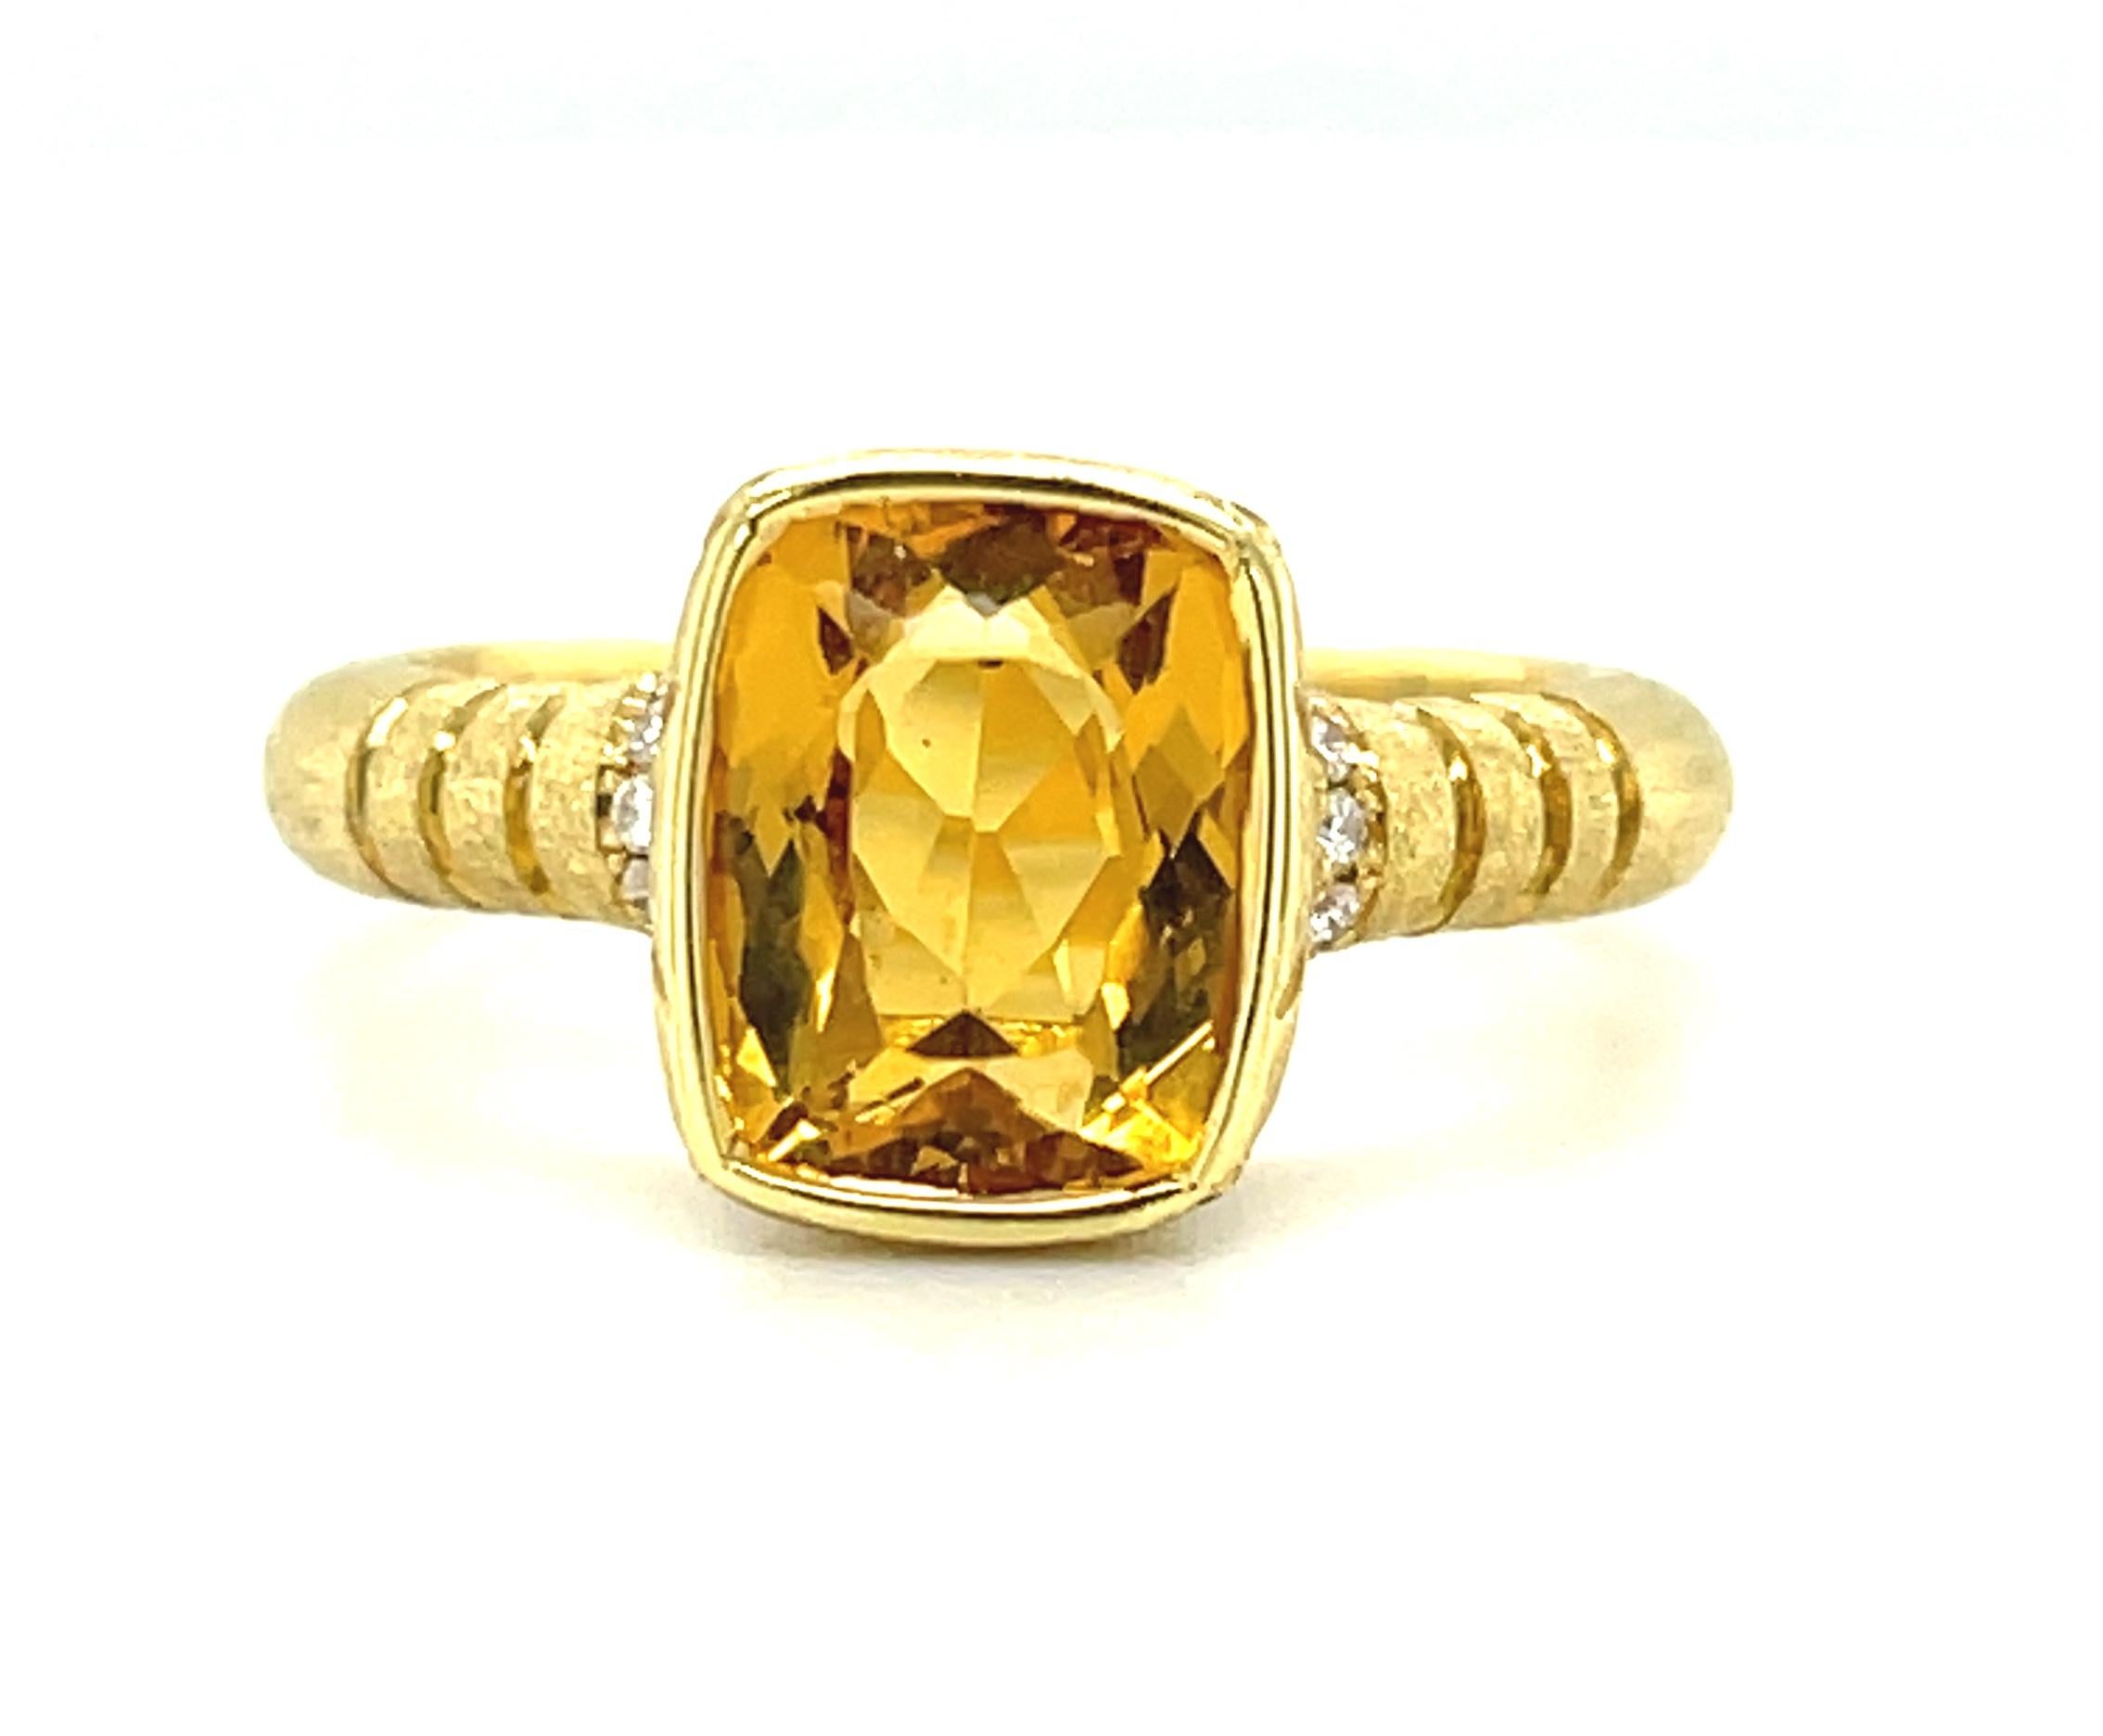 Featuring a golden honey-colored yellow beryl, this handcrafted ring was exquisitely made in 18k yellow gold which emphasizes the rich color of the center stone. The cushion-cut yellow beryl is bezel set with brilliant white diamonds adorning the